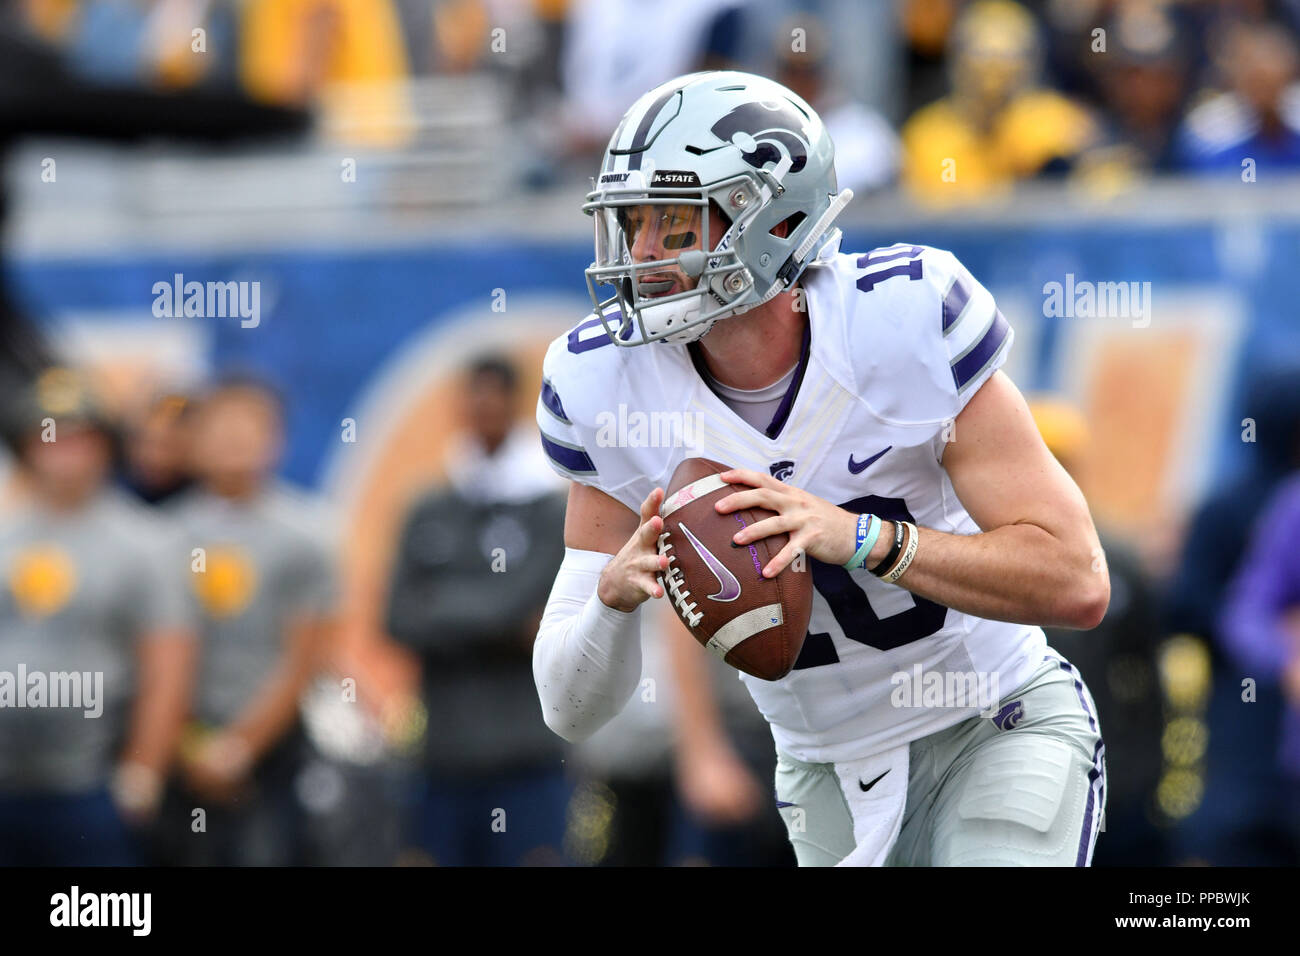 Morgantown, West Virginia, USA. 22nd Sep, 2018. Kansas State Wildcats quarterback SKYLAR THOMPSON (10) rolls out during the Big 12 football game played at Mountaineer Field in Morgantown, WV. WVU beat Kansas State 35-6. Credit: Ken Inness/ZUMA Wire/Alamy Live News Stock Photo